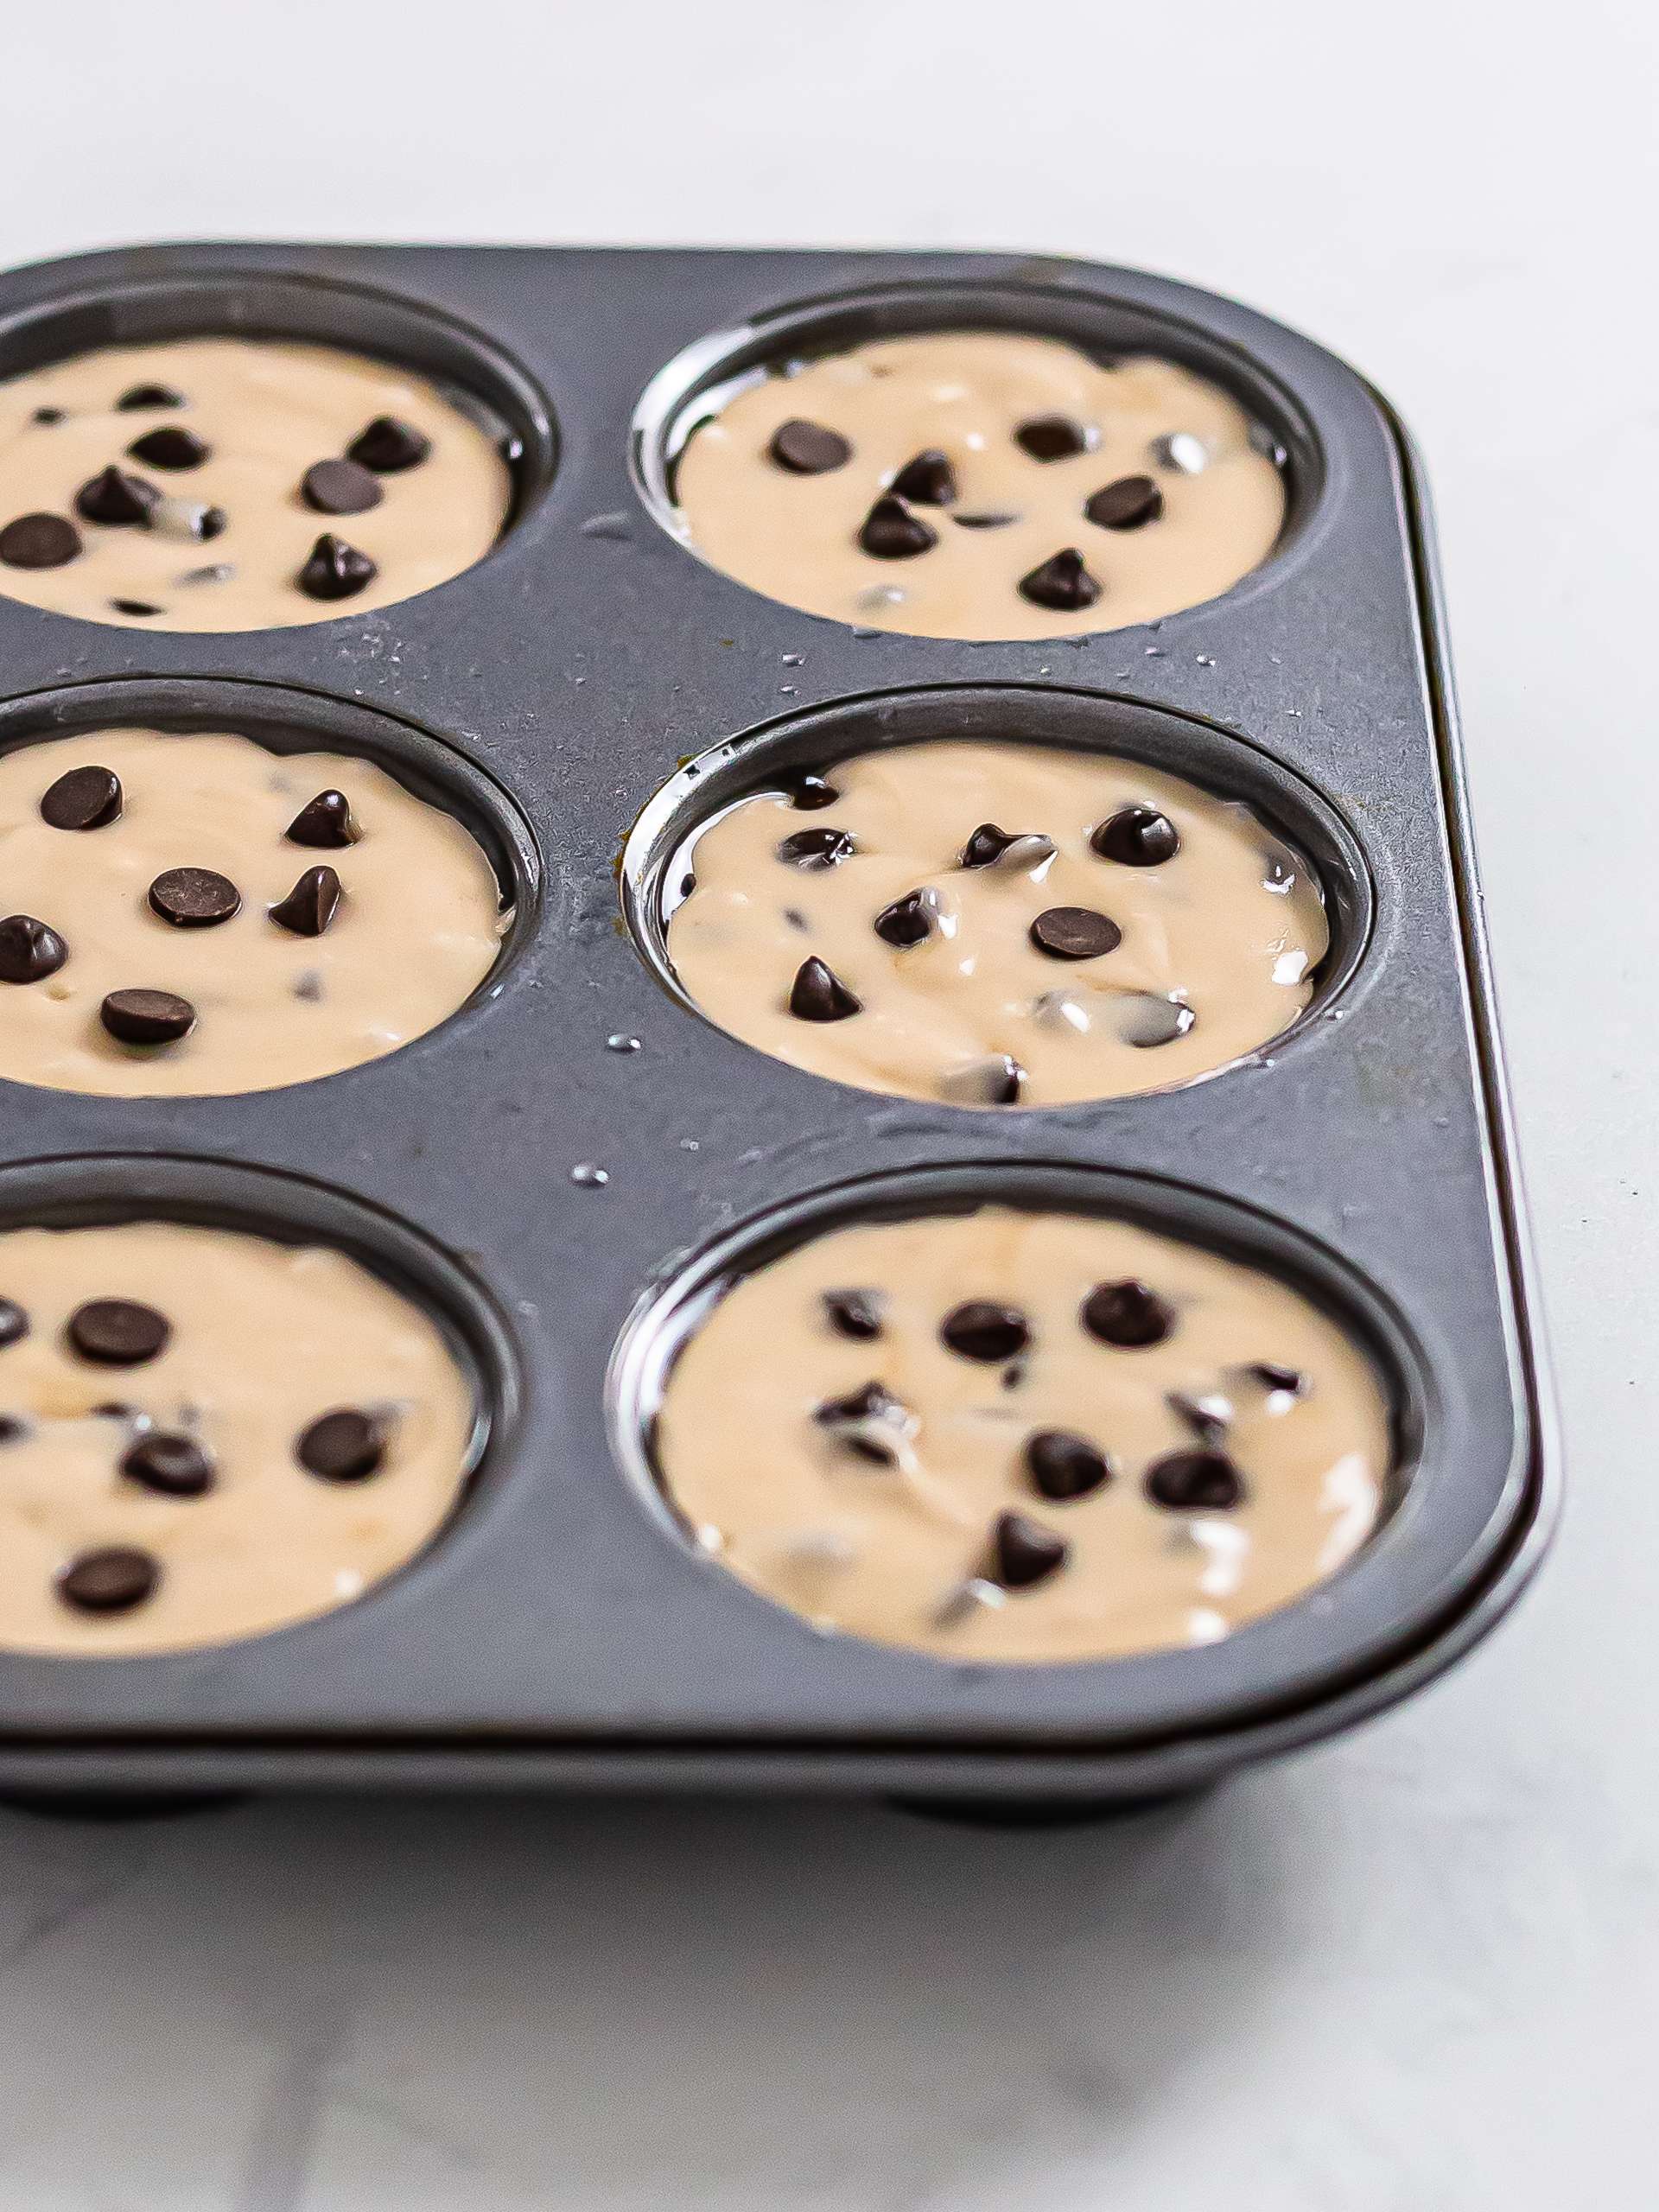 mochi muffins batter in a muffin tray